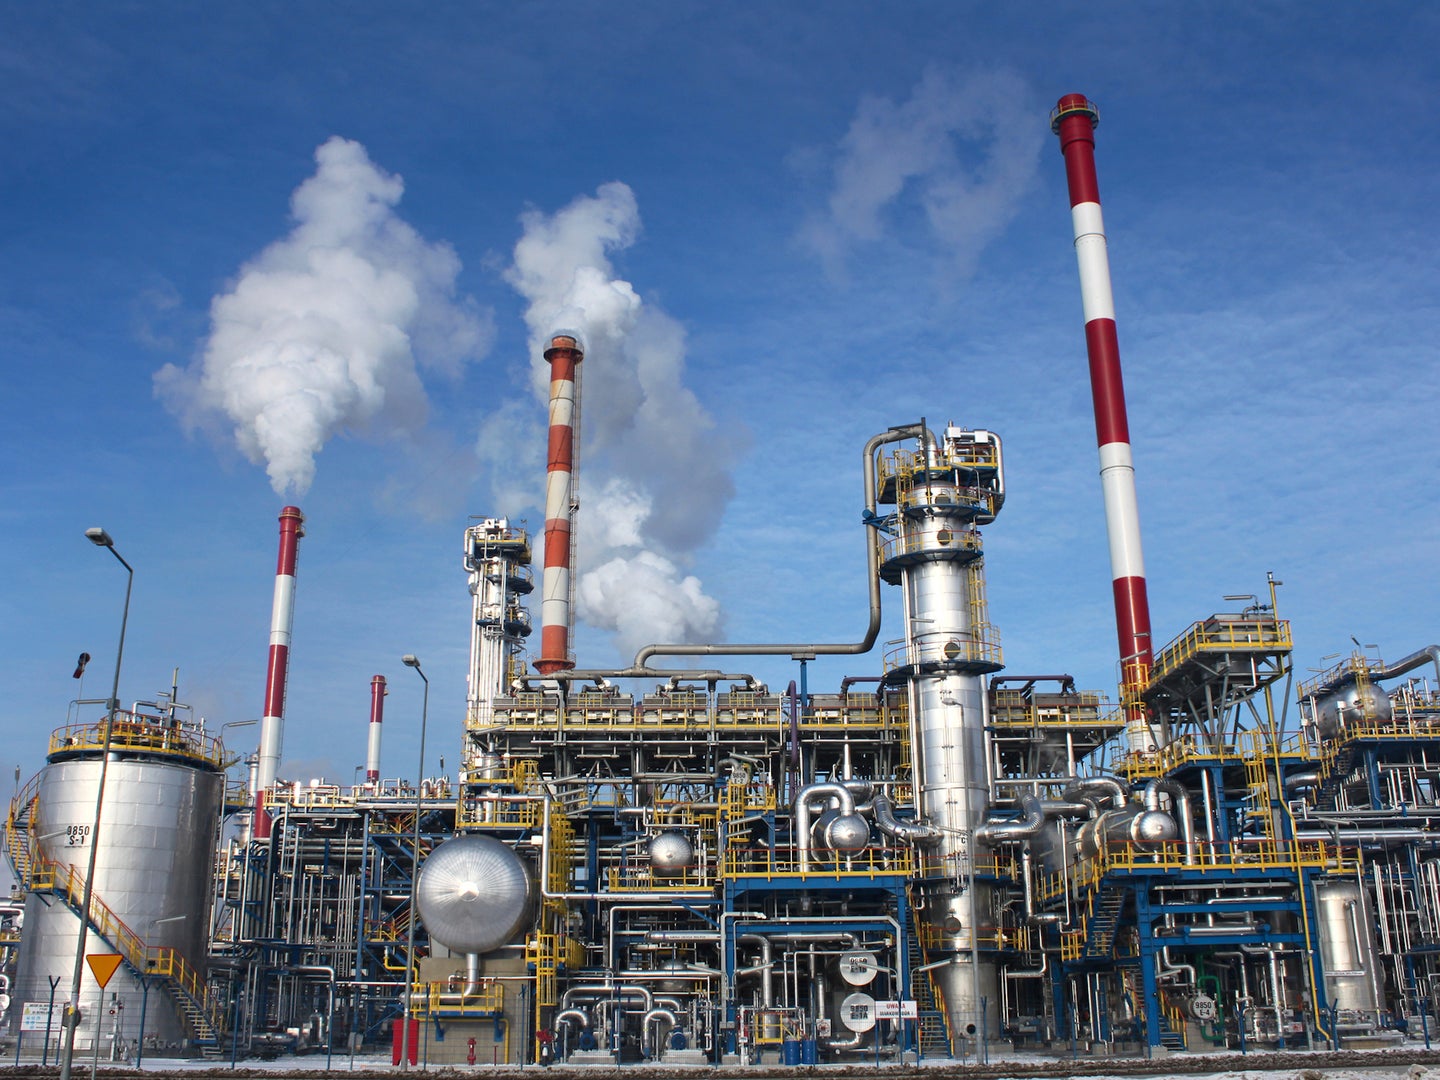 Industrial shot of an oil refinery plant